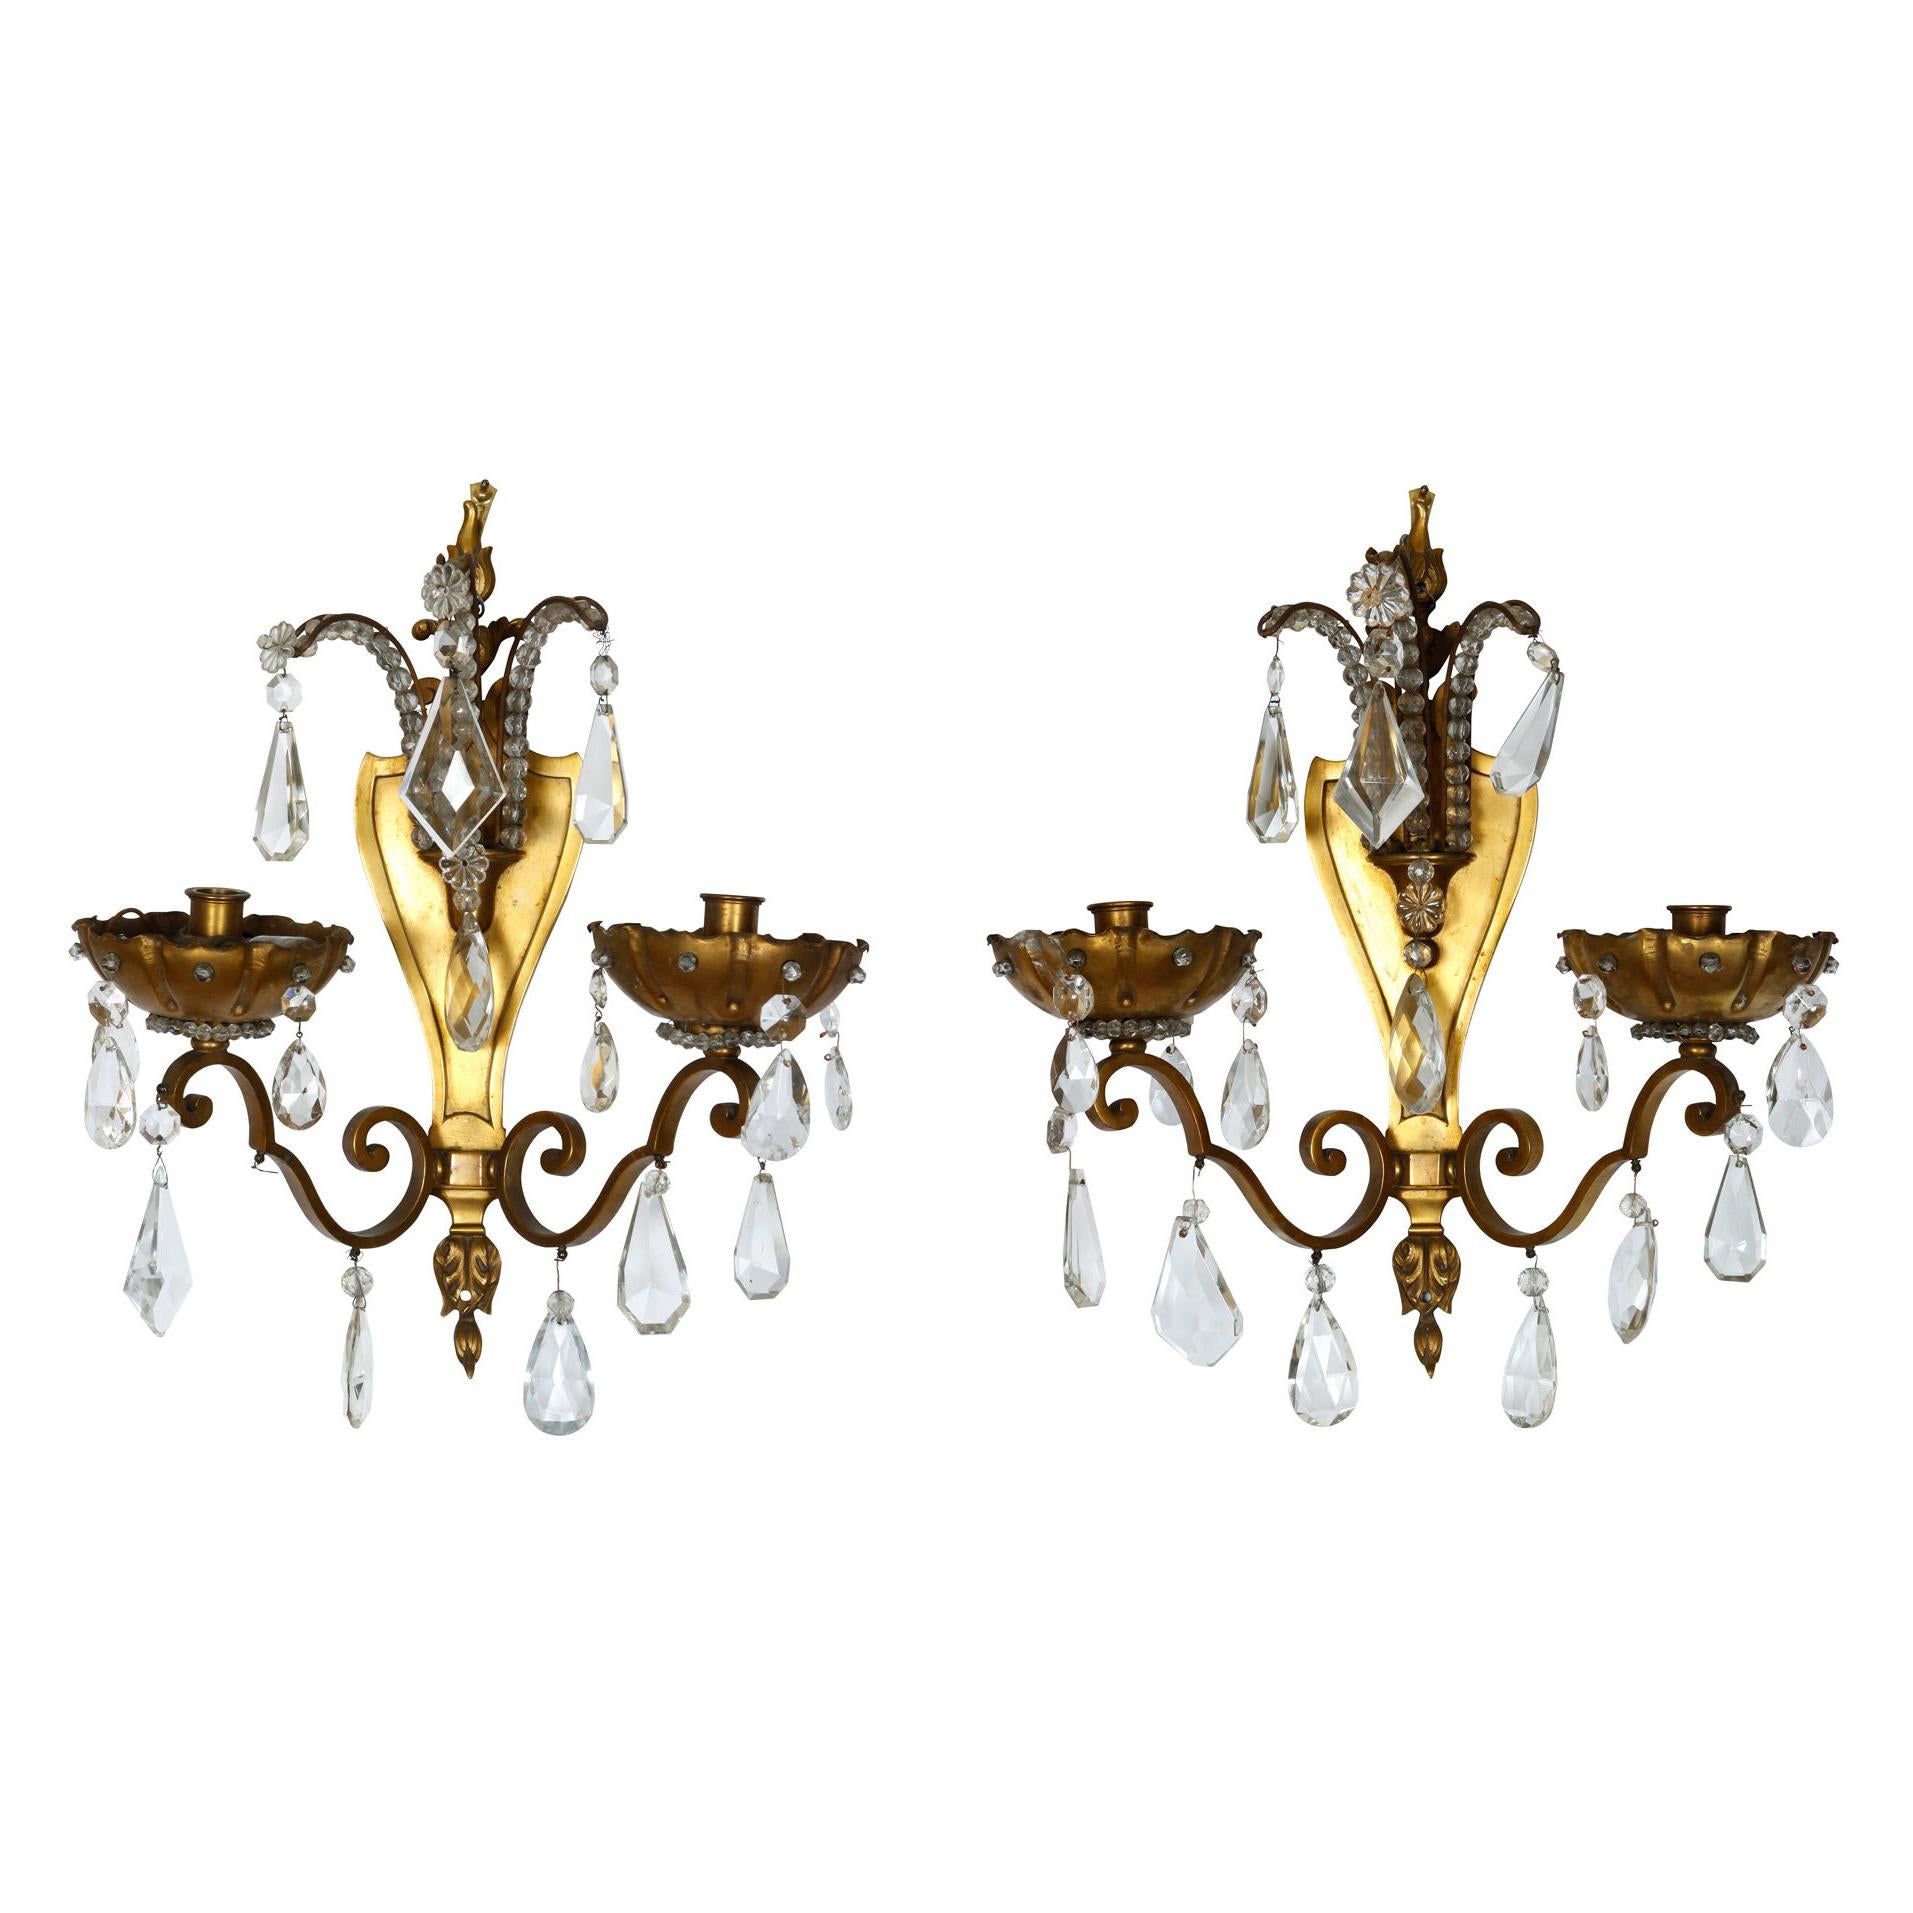 Pair of Jansen Style Bronze Sconces with Crystal Prisms